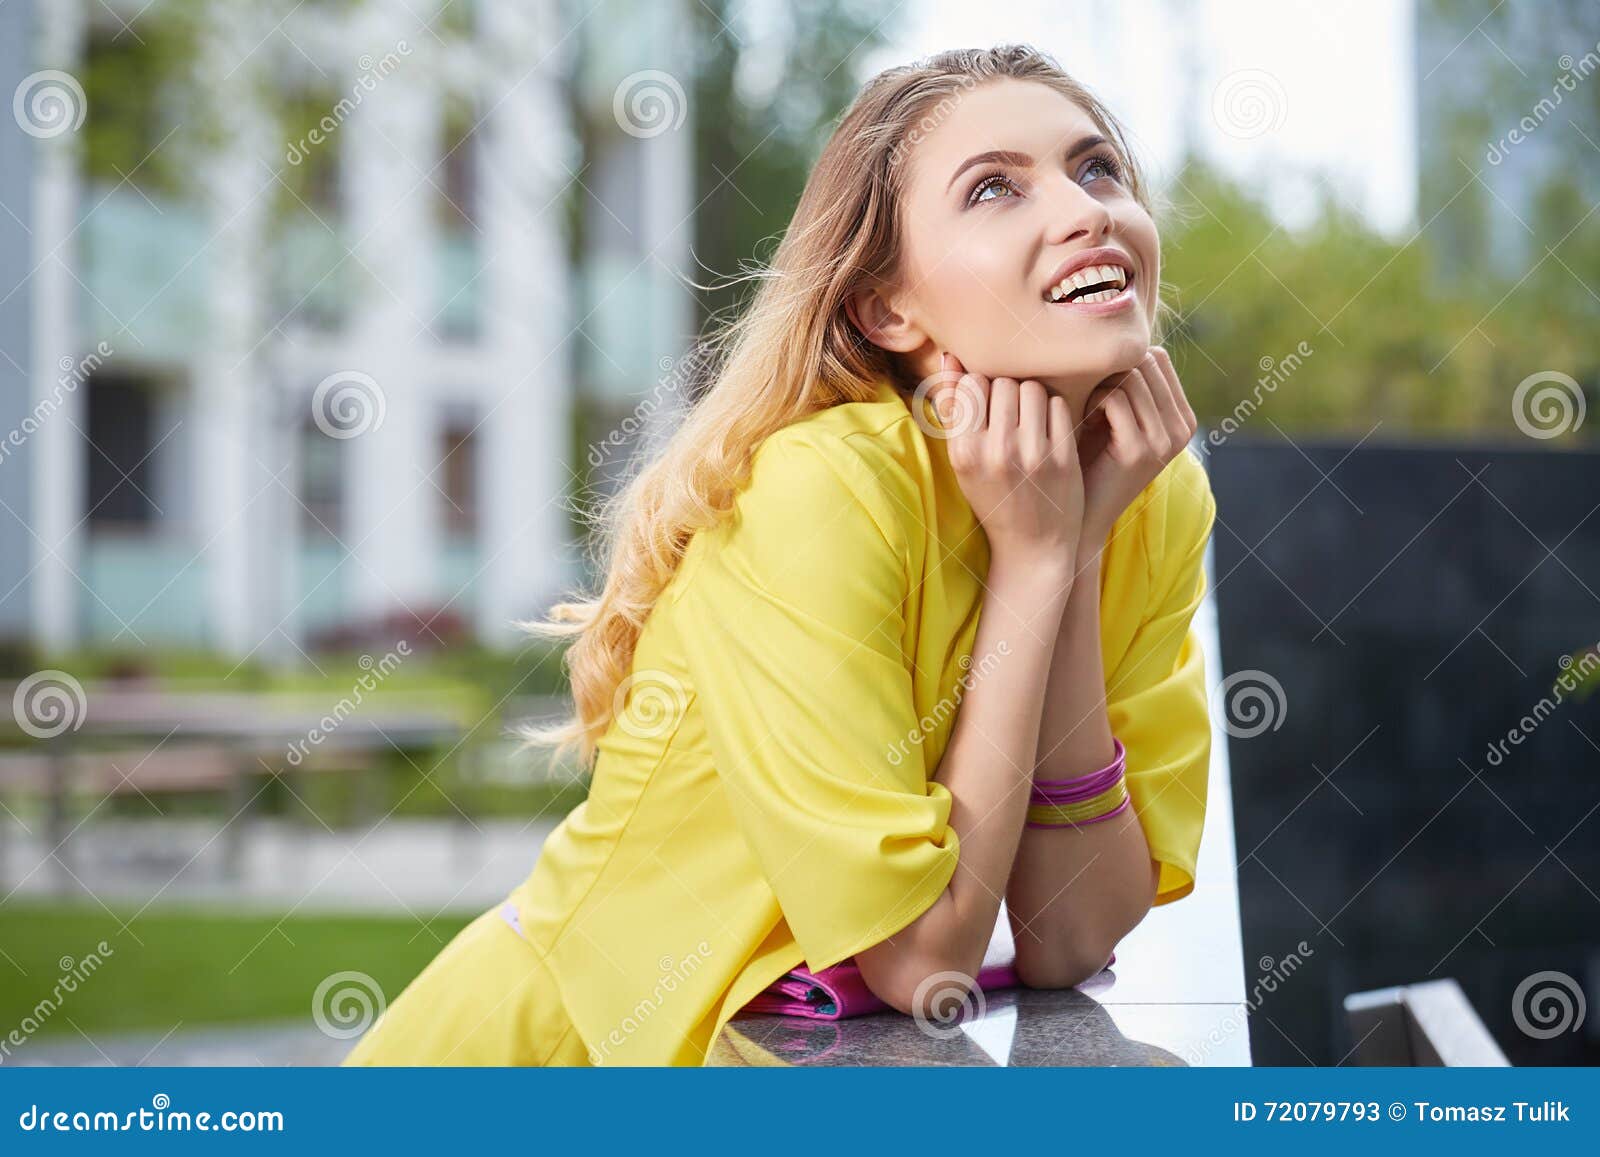 Woman in Yellow Dress Posing Outdoors Stock Image - Image of city ...